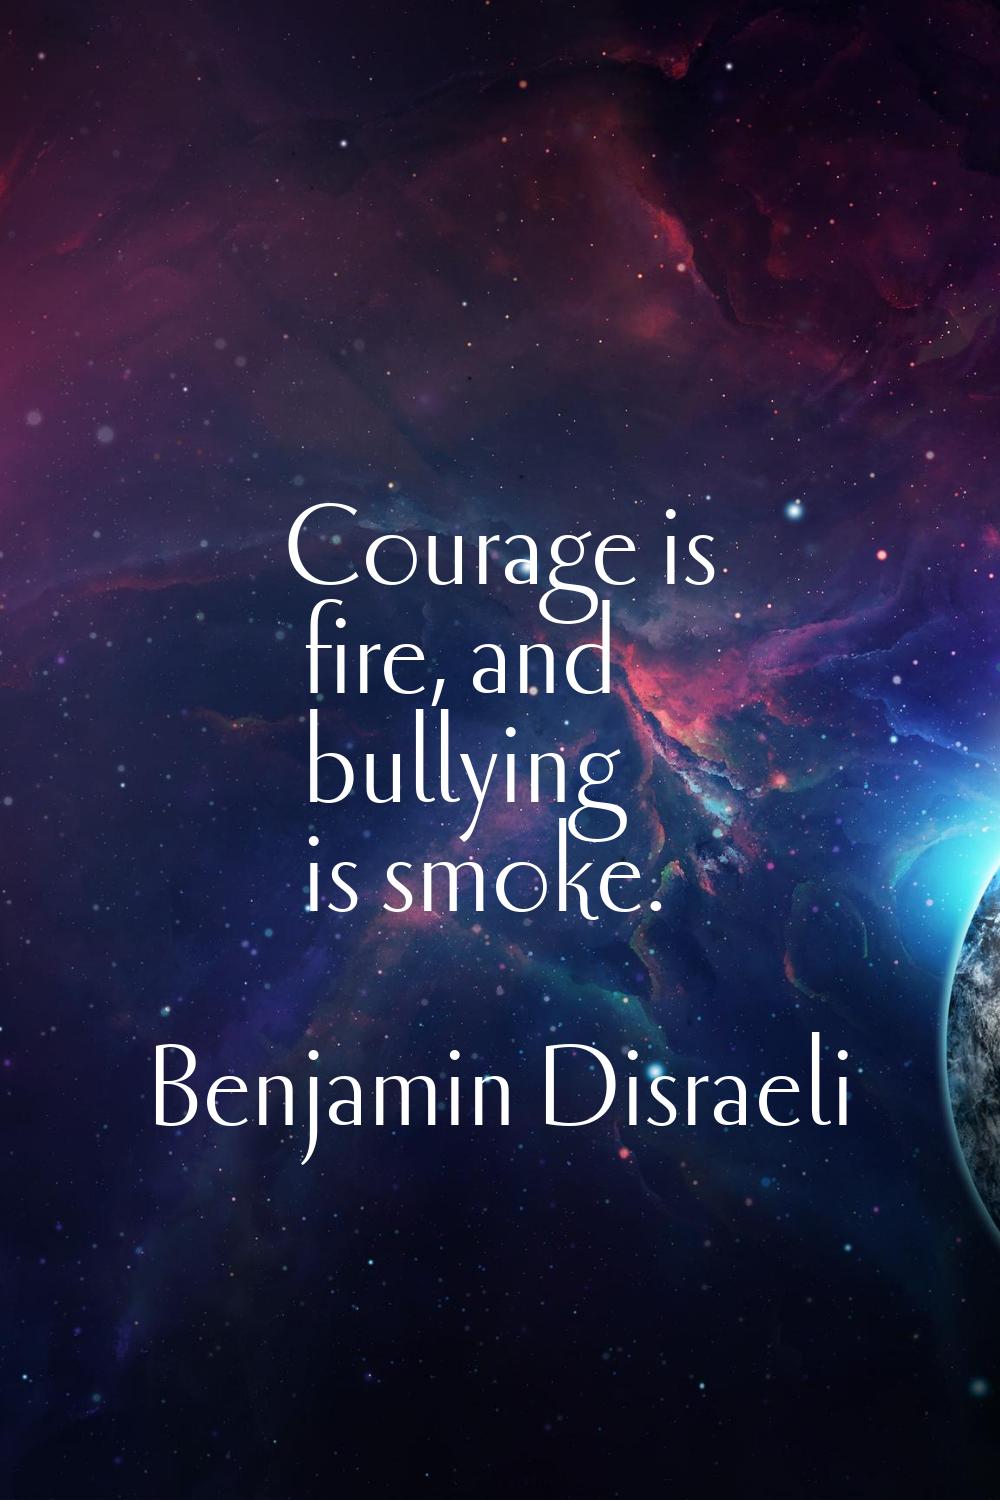 Courage is fire, and bullying is smoke.